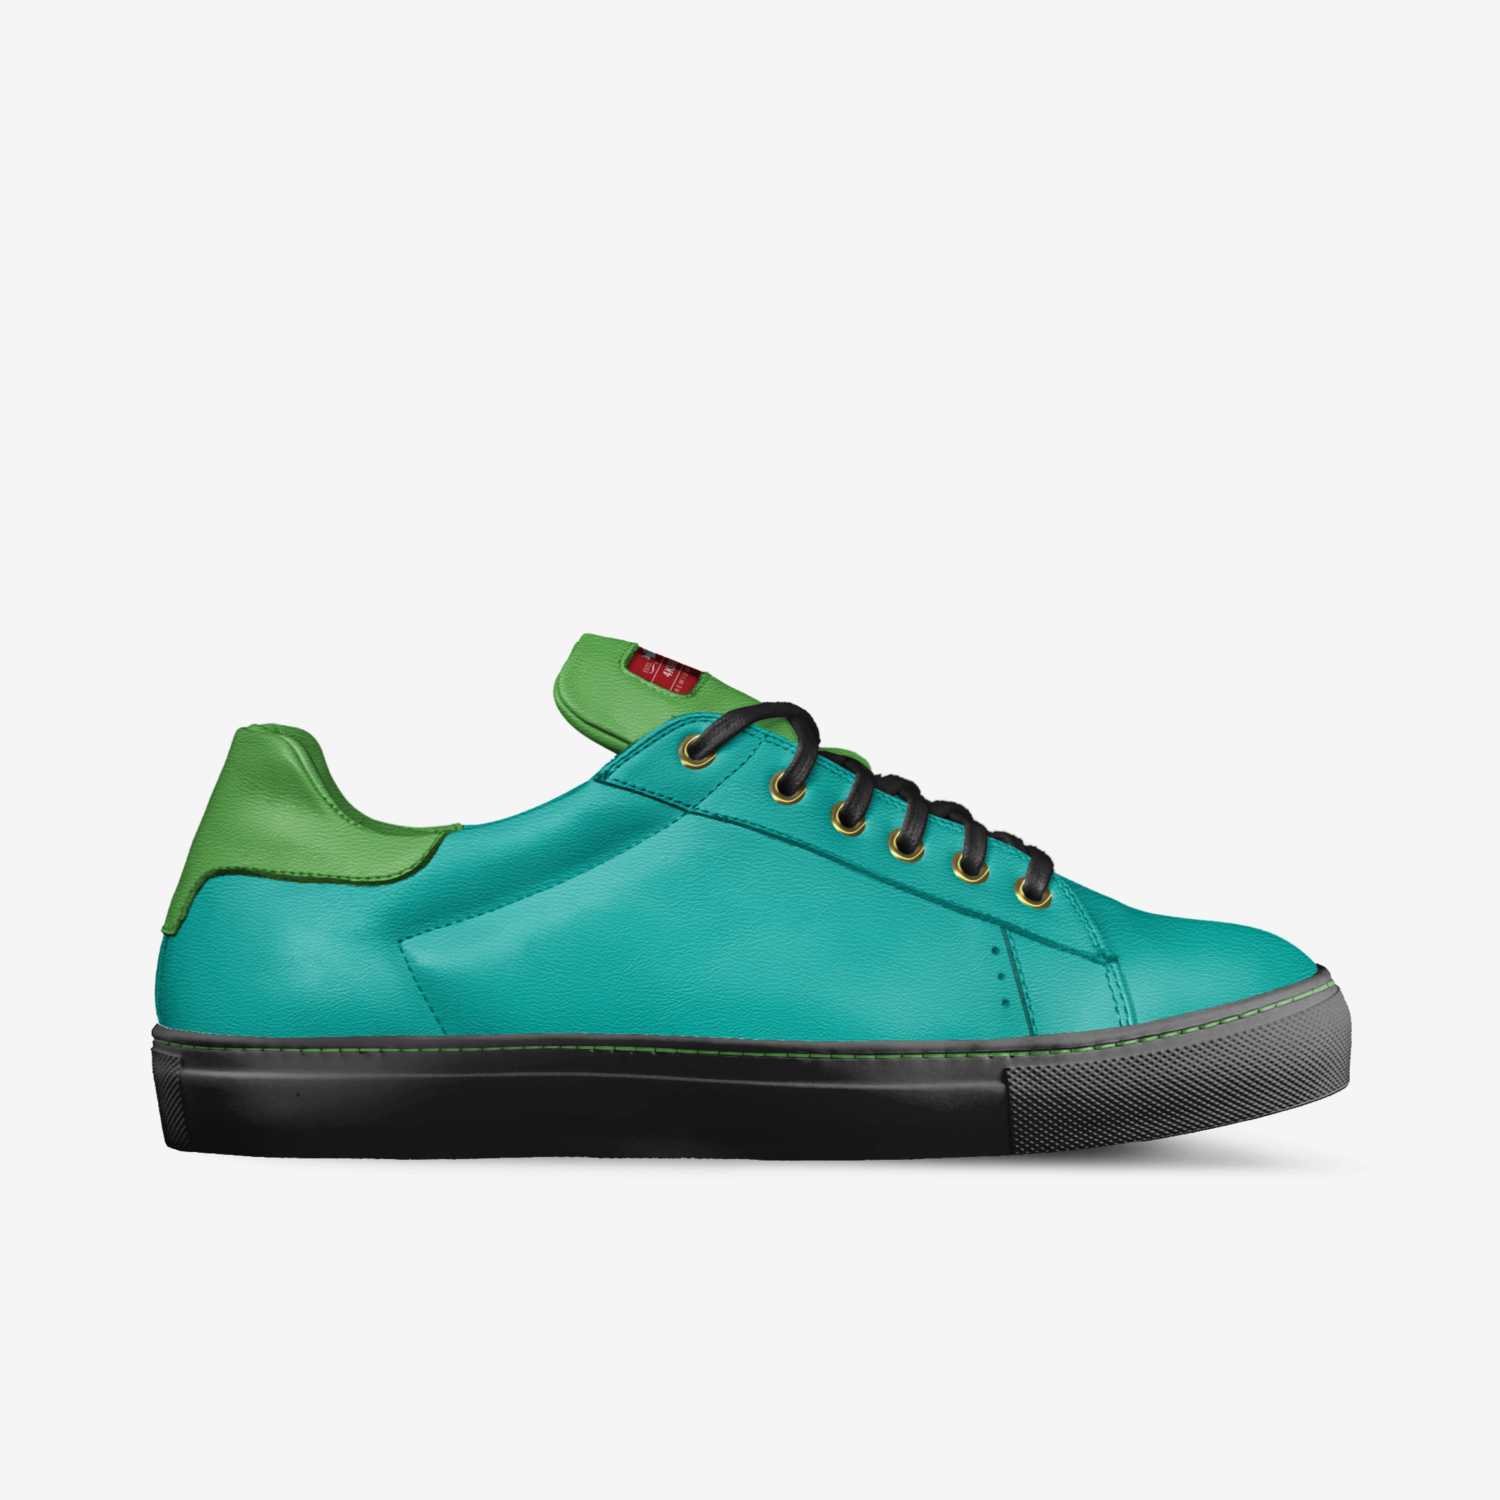 4kirsten custom made in Italy shoes by Mason Jonas | Side view